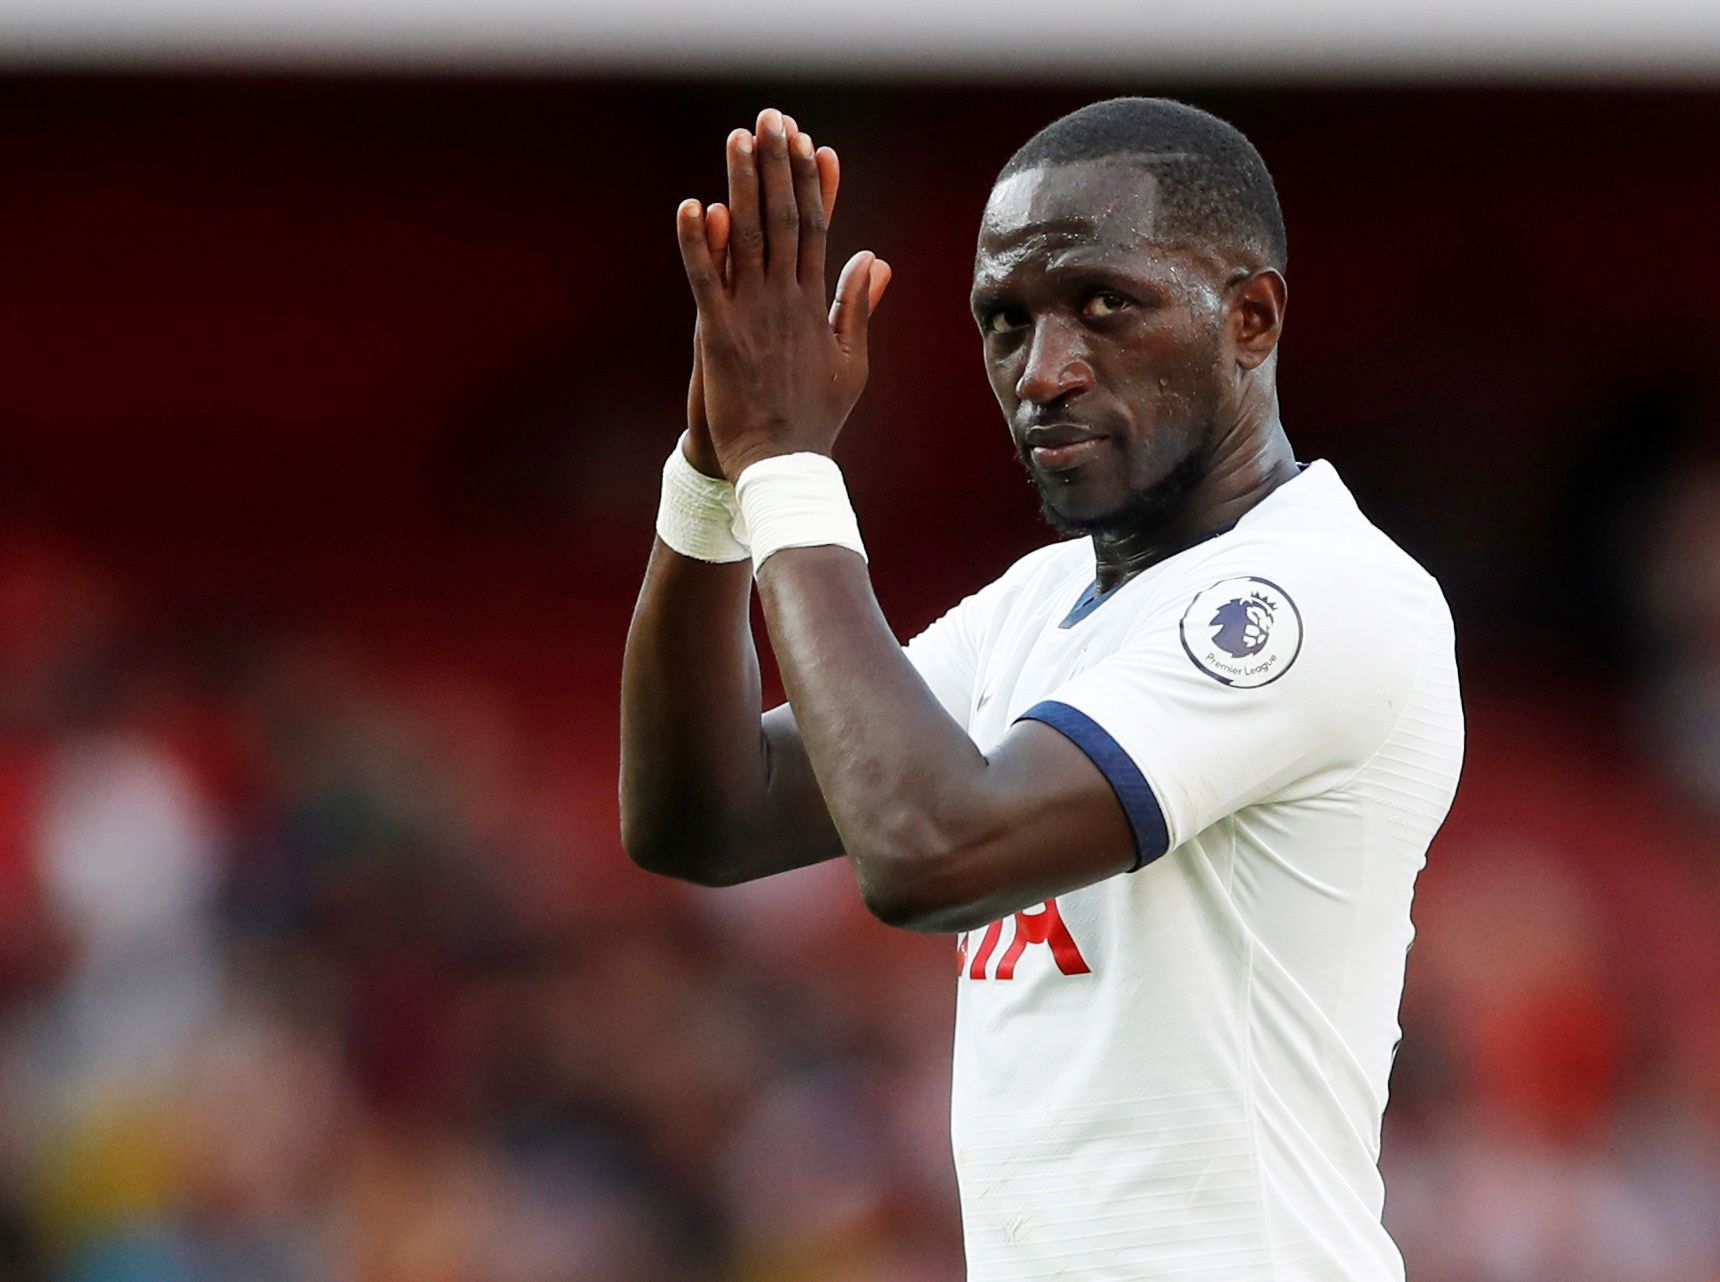 Soccer Football - Premier League - Arsenal v Tottenham Hotspur - Emirates Stadium, London, Britain - September 1, 2019  Tottenham Hotspur's Moussa Sissoko applauds the fans after the match   Action Images via Reuters/Matthew Childs  EDITORIAL USE ONLY. No use with unauthorized audio, video, data, fixture lists, club/league logos or 